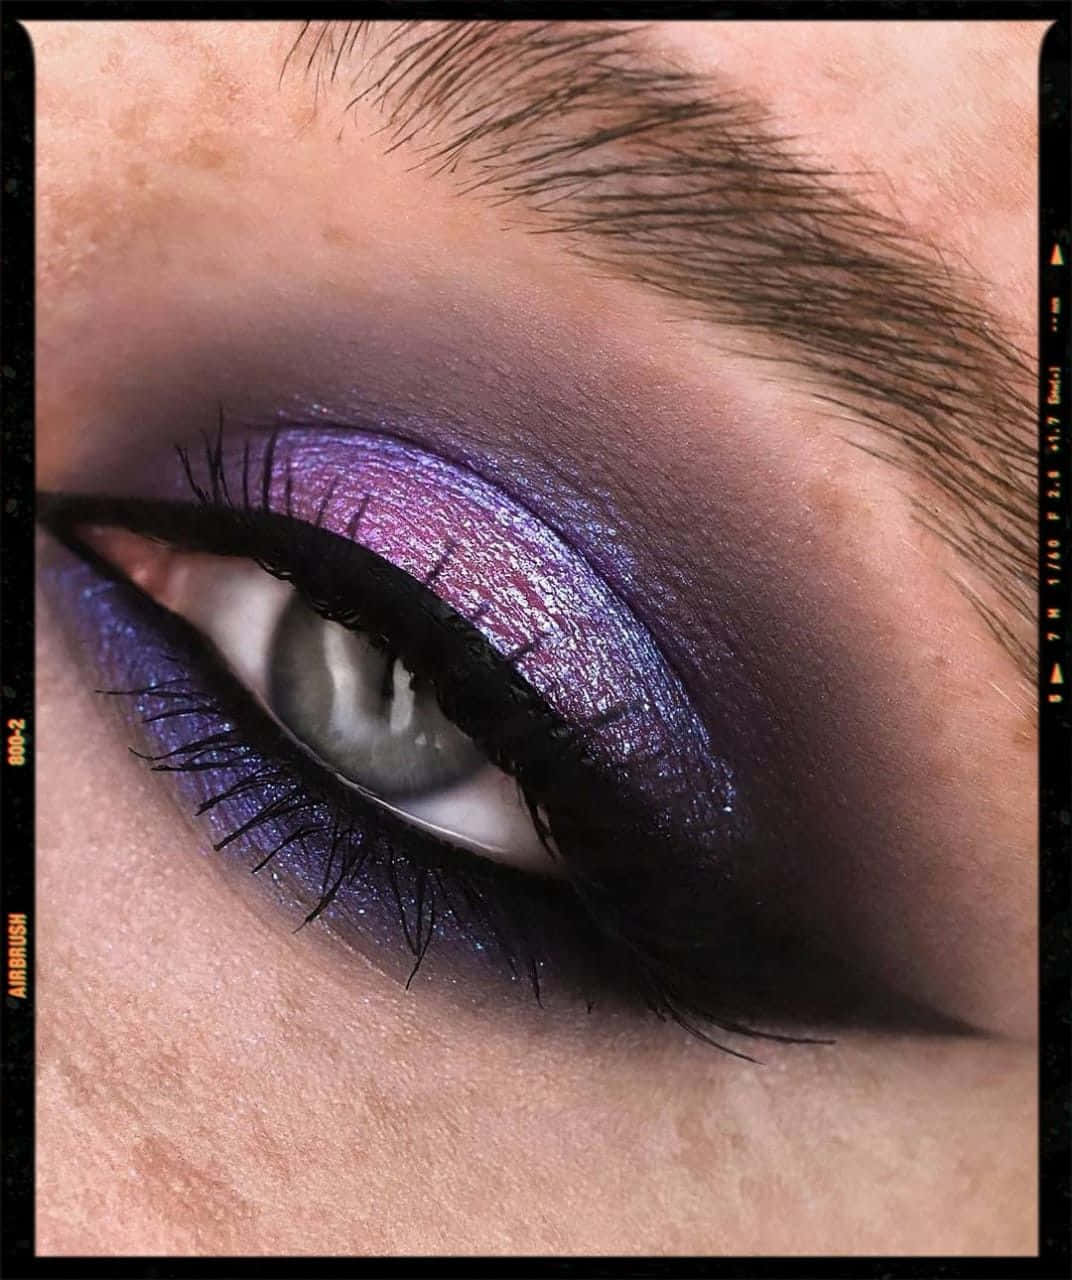 "Breathe life into your eyes with a vibrant purple eye shadow look" Wallpaper